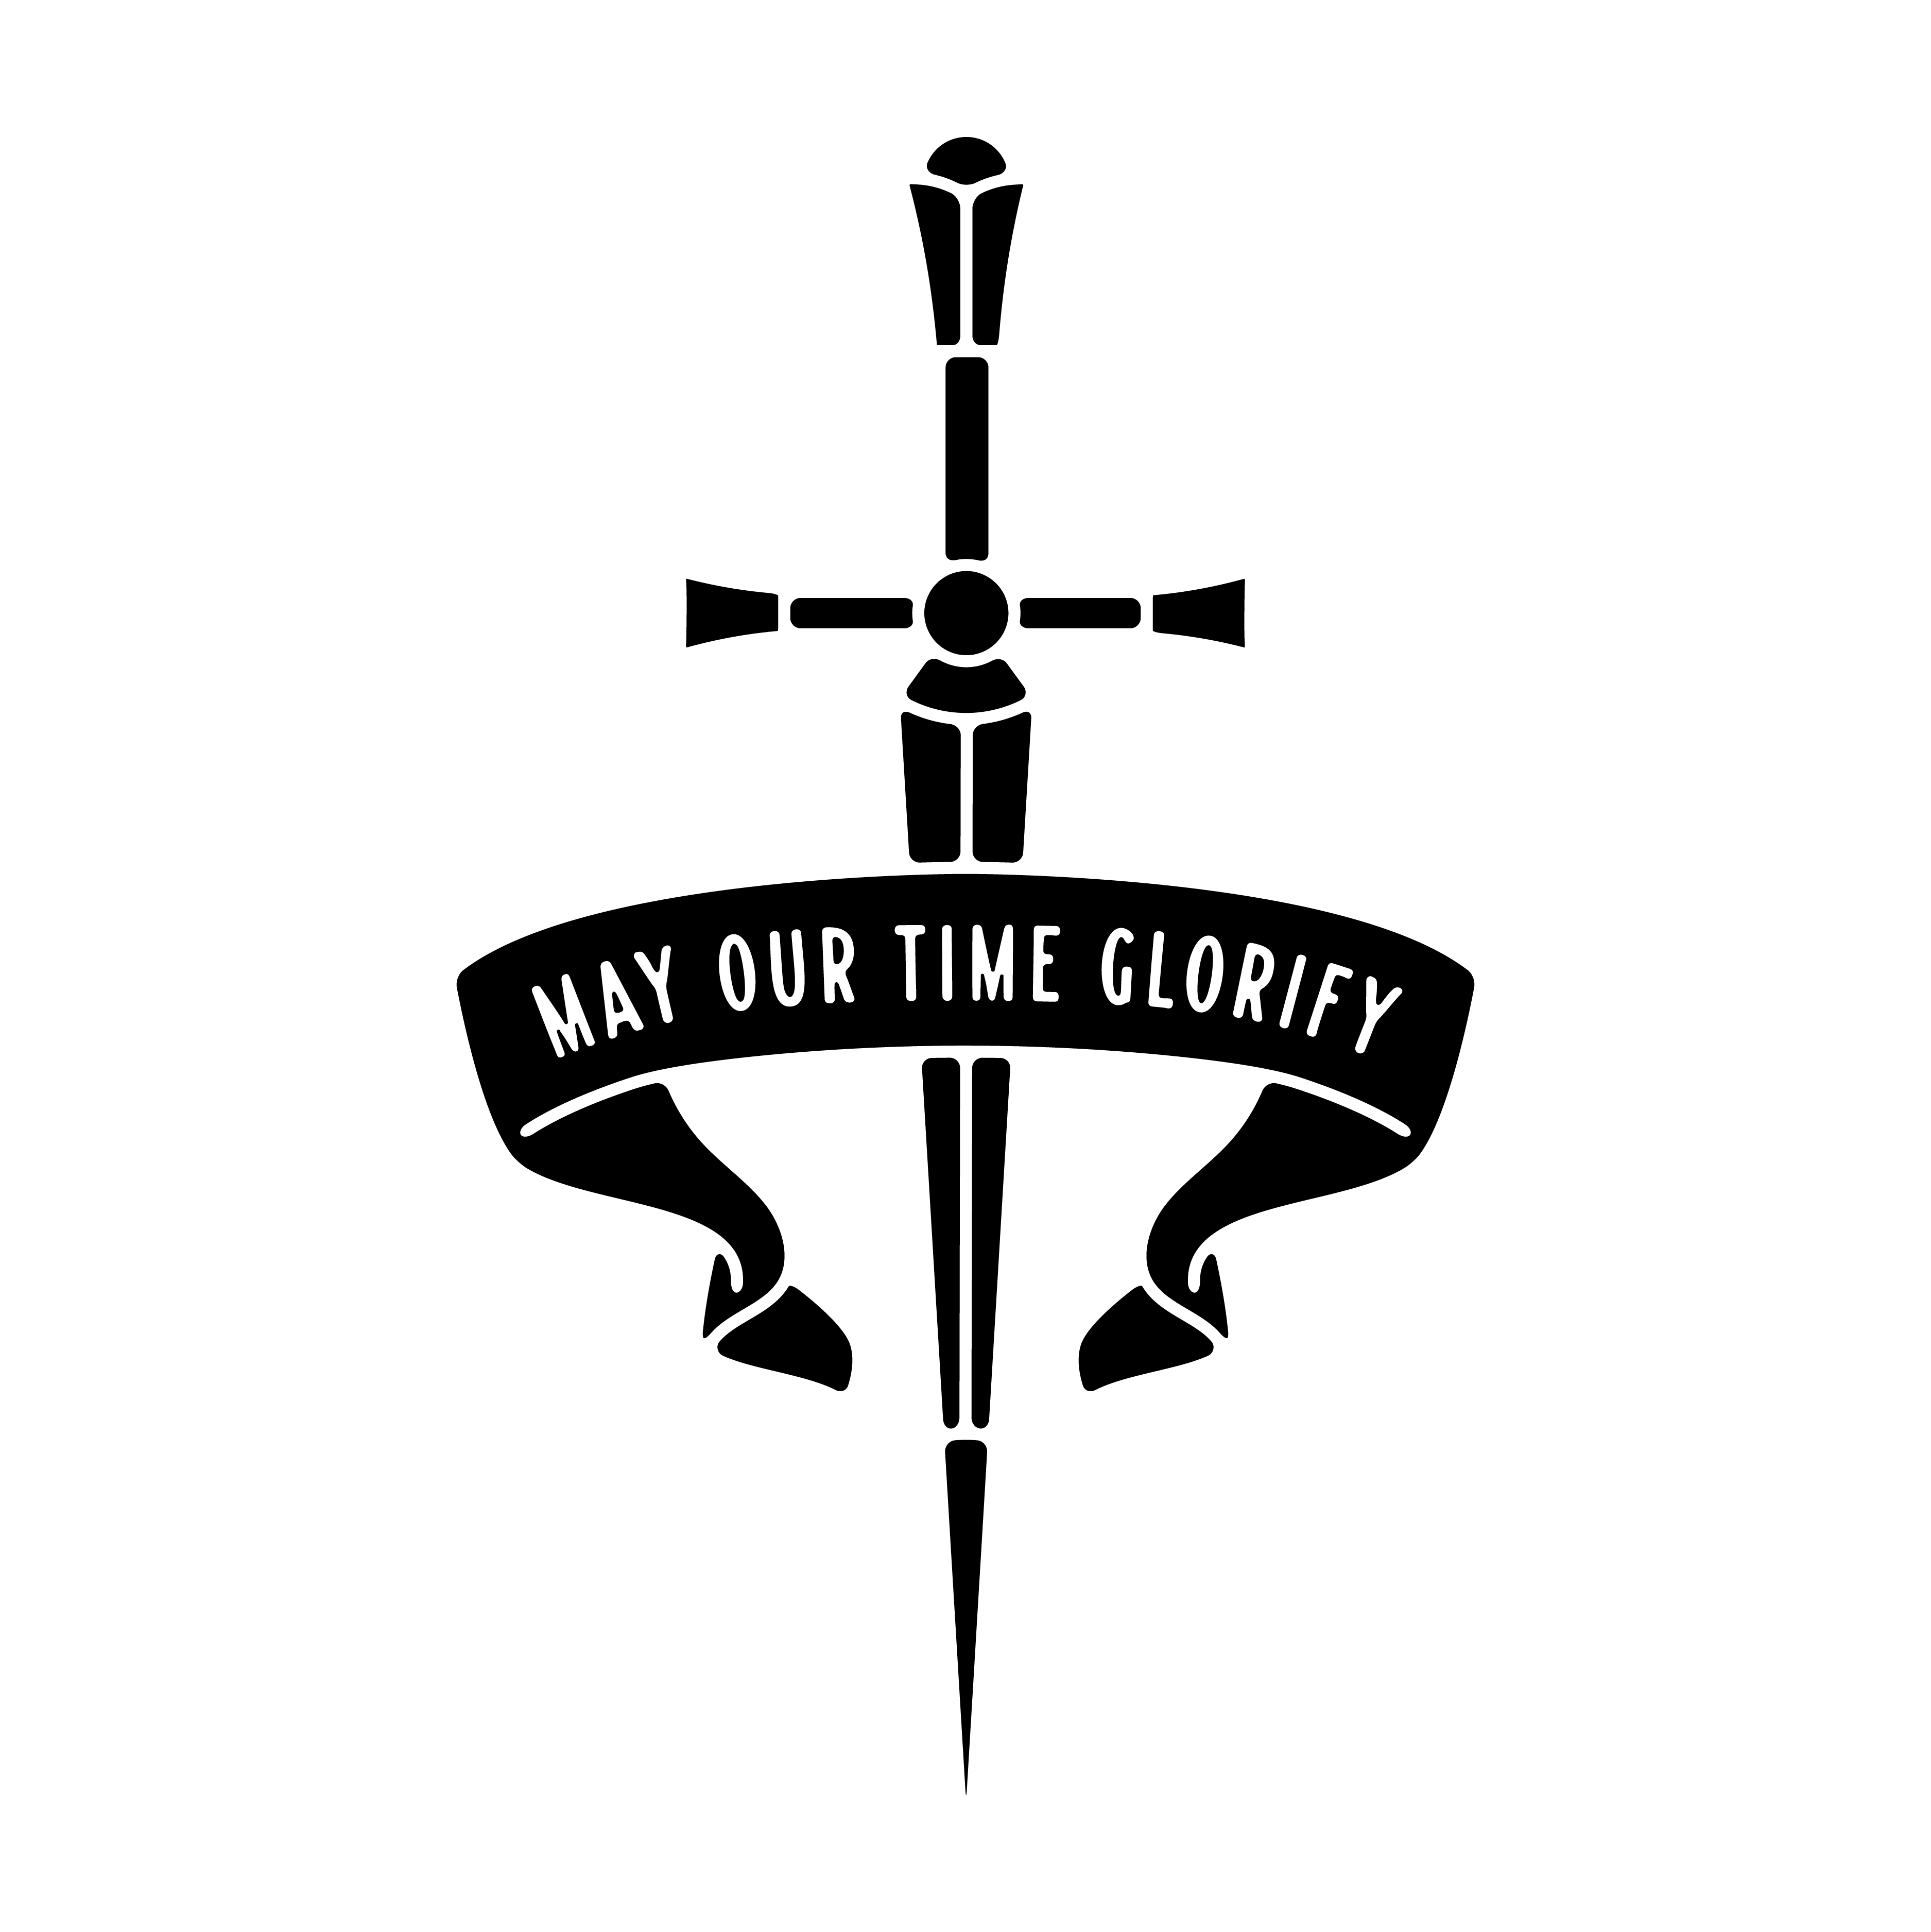 May Our Time Glorify logo design by logo designer Decree Design Co for your inspiration and for the worlds largest logo competition